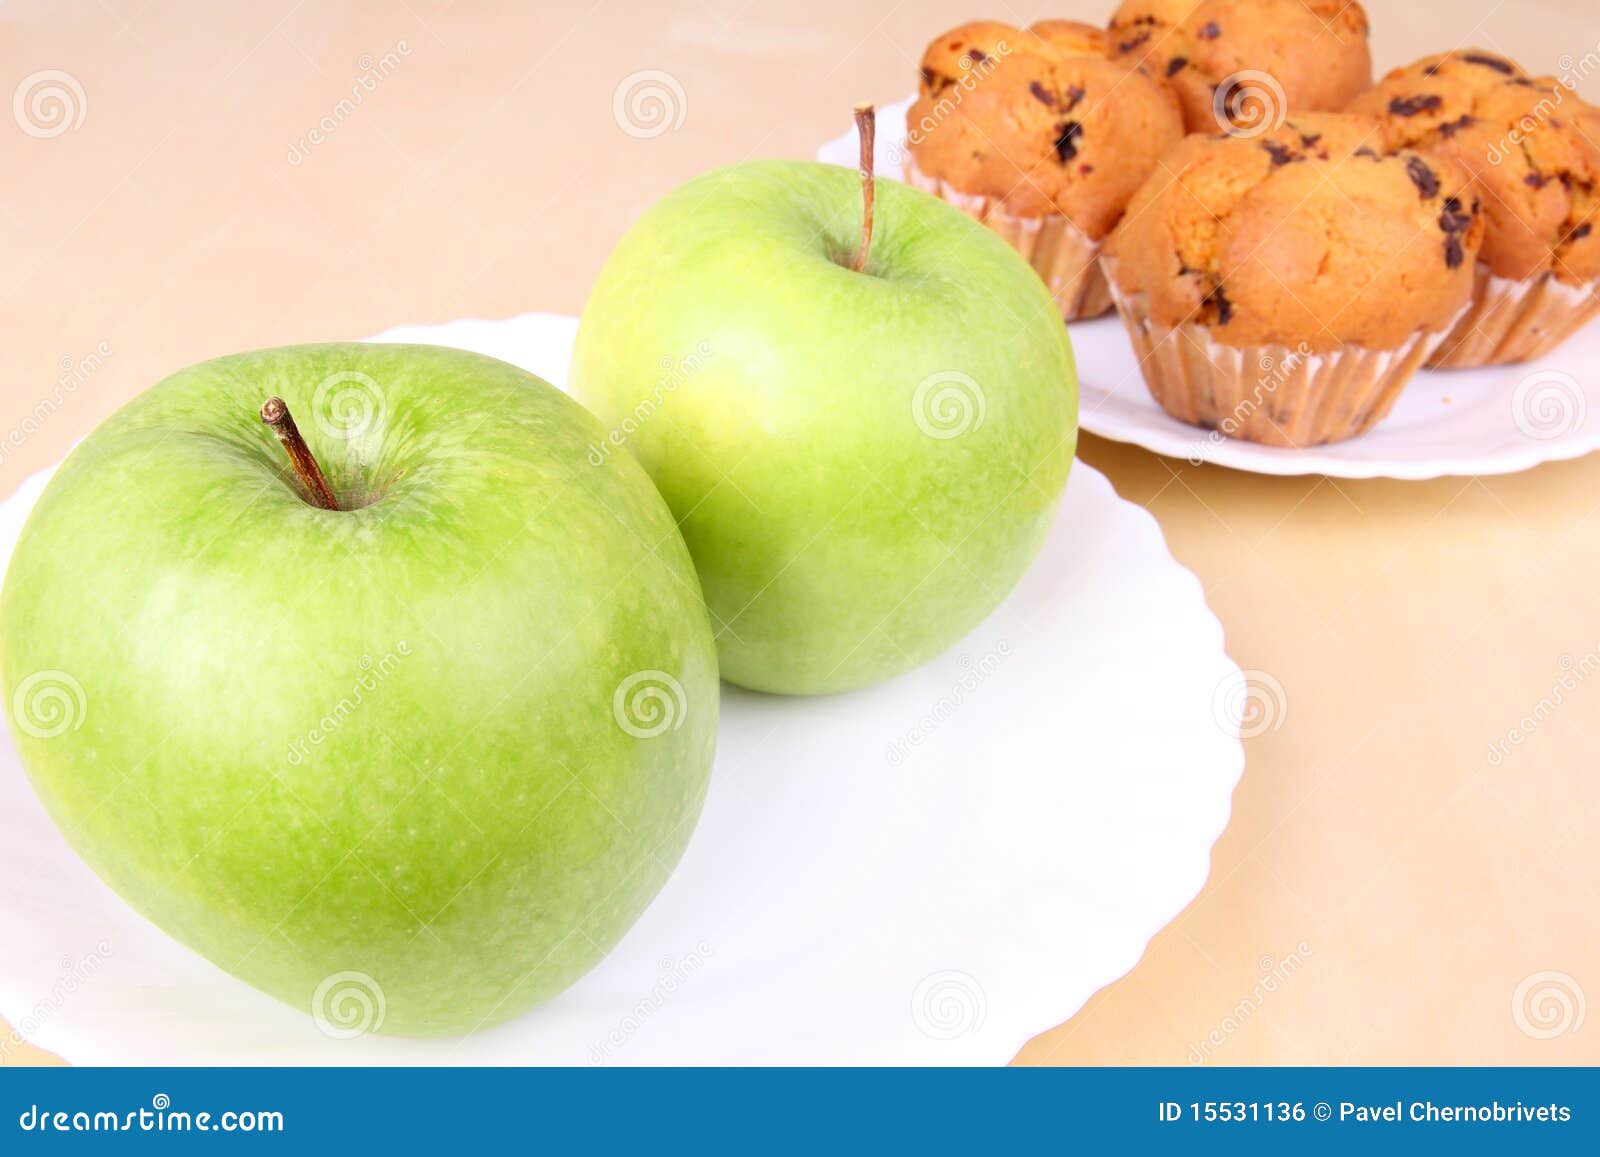 Two apples and cakes on white plates